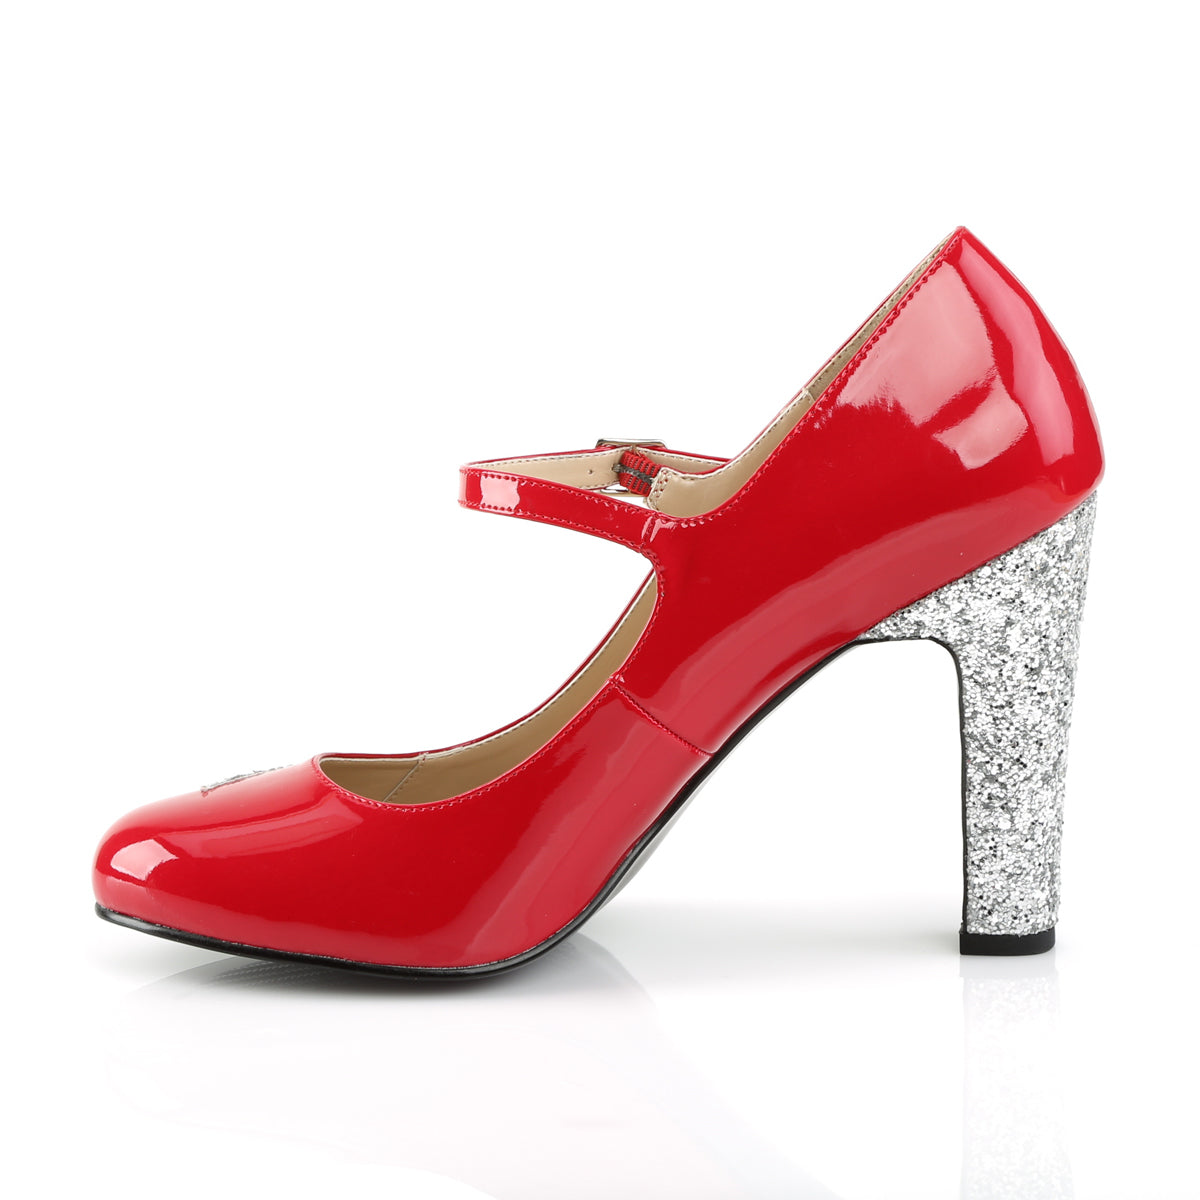 Pleaser Pink Label Womens Pumps QUEEN-02 Red Pat-Slv Glitter